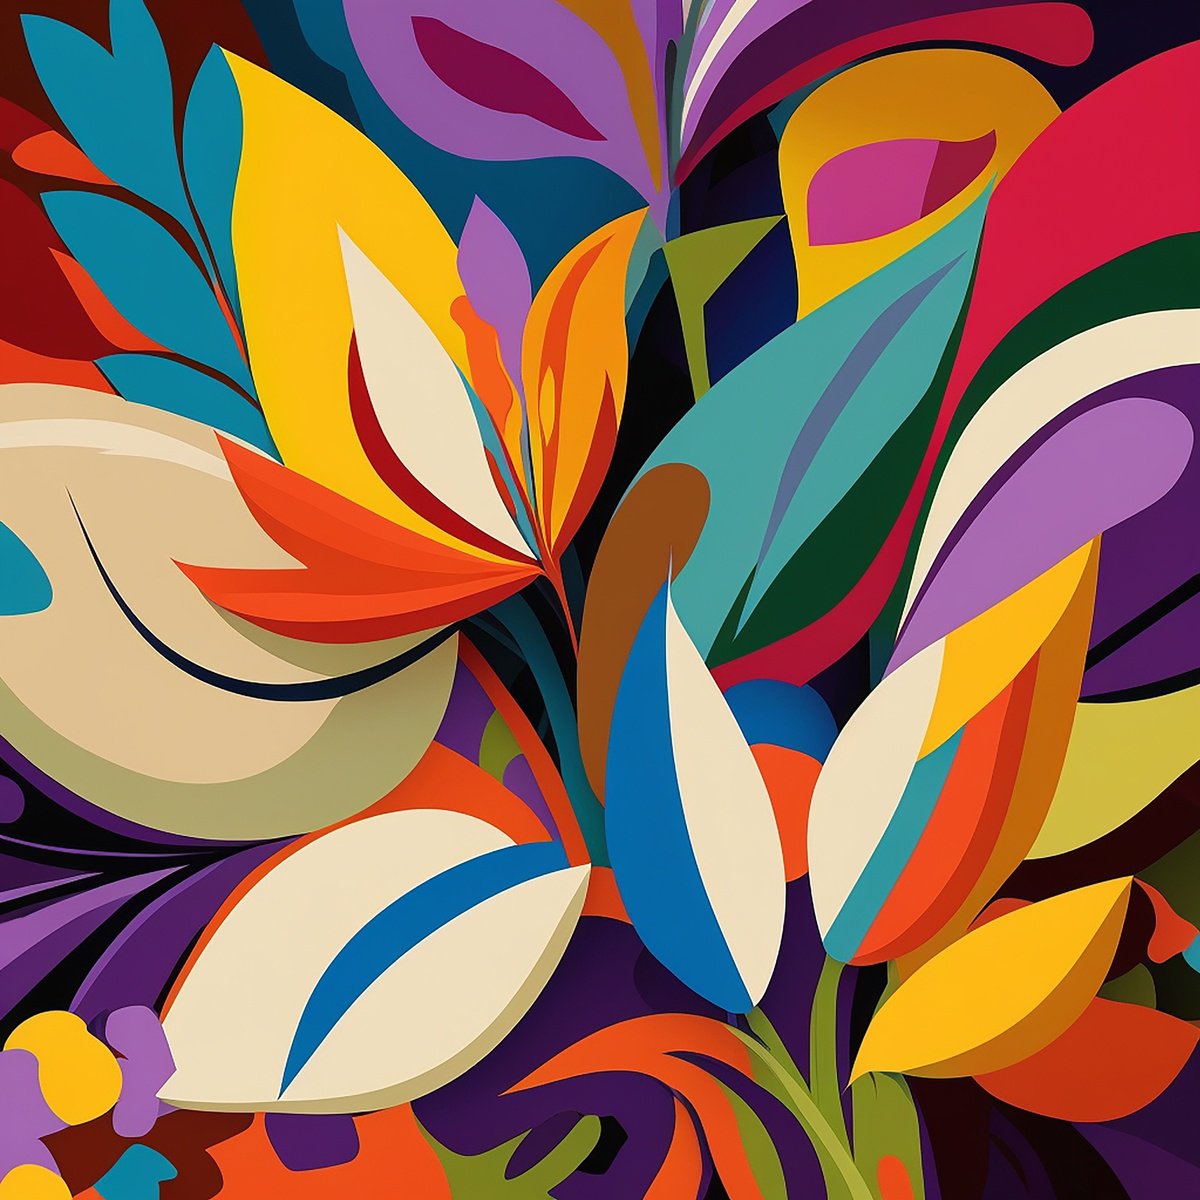 Floral abstract by Kosta Morr